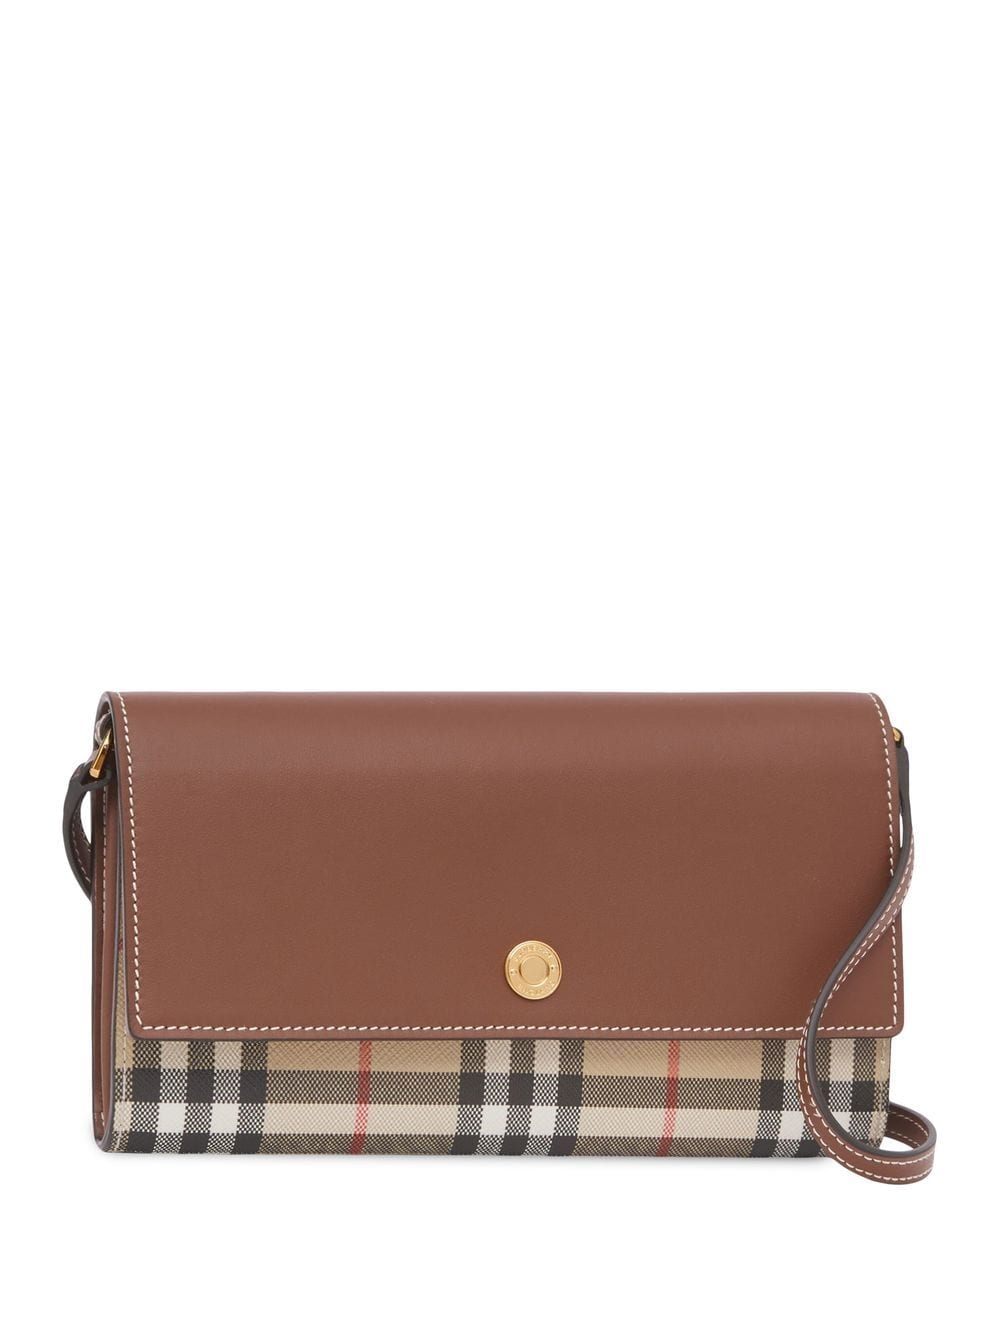 Check Wallet with Chain Strap in Archive Beige - Women